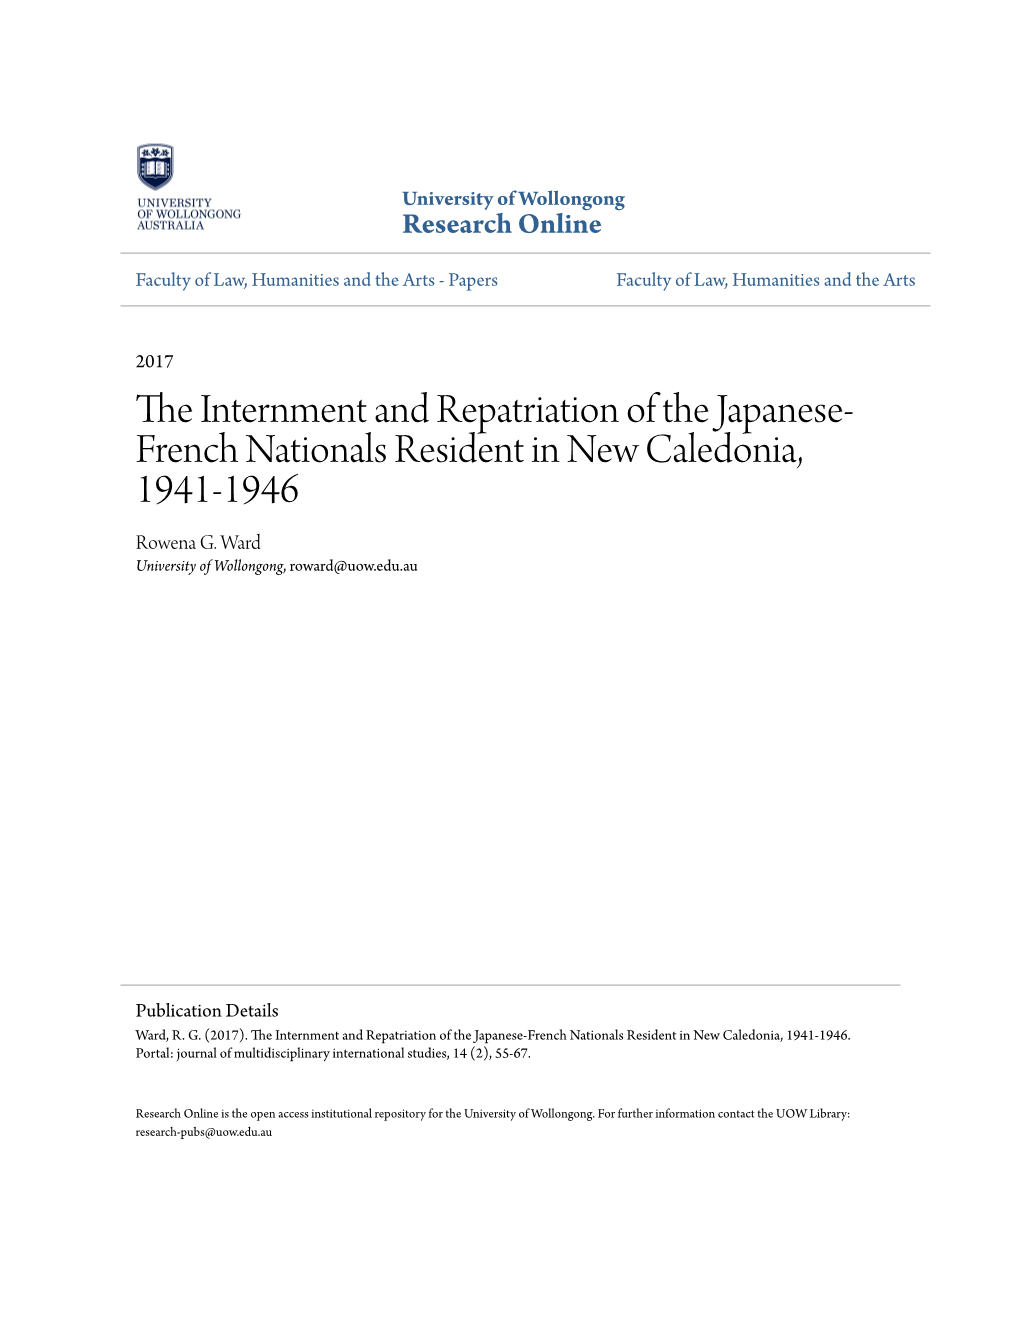 The Internment and Repatriation of the Japanese-French Nationals Resident in New Caledonia, 1941–1946